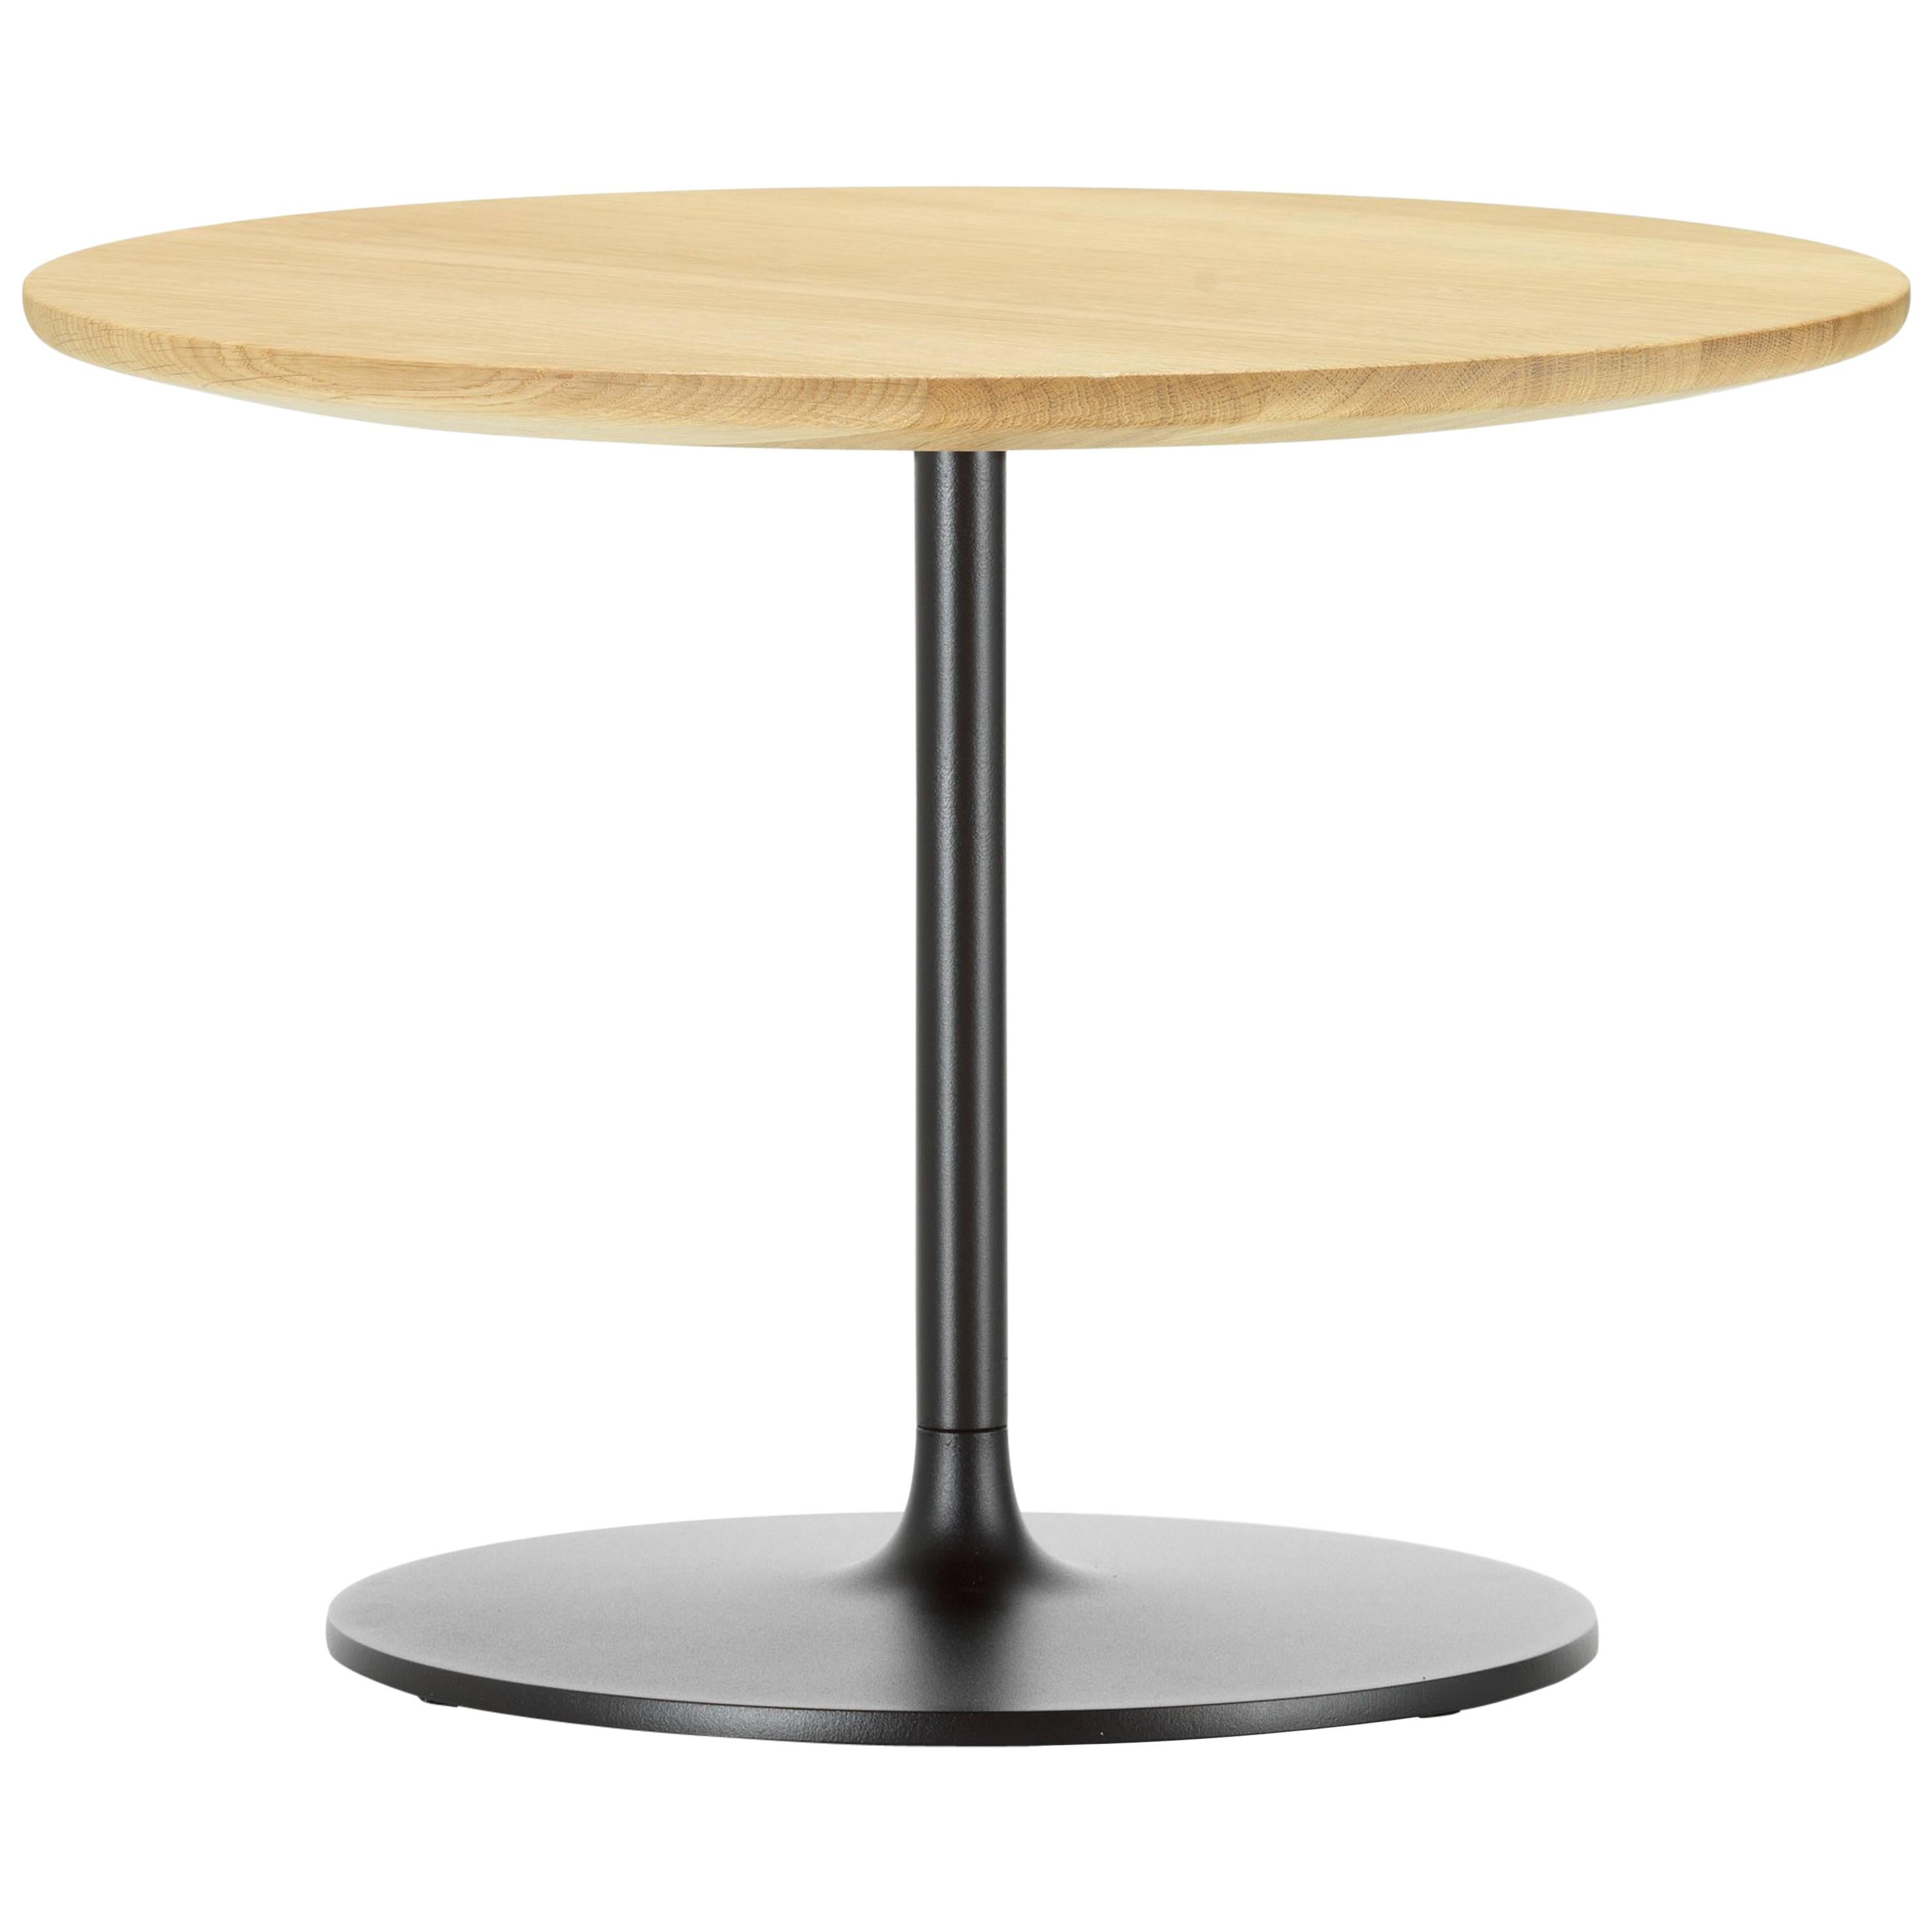 Vitra Occasional Low Table 35 in Natural Oak Solid Wood by Jasper Morrison im Angebot